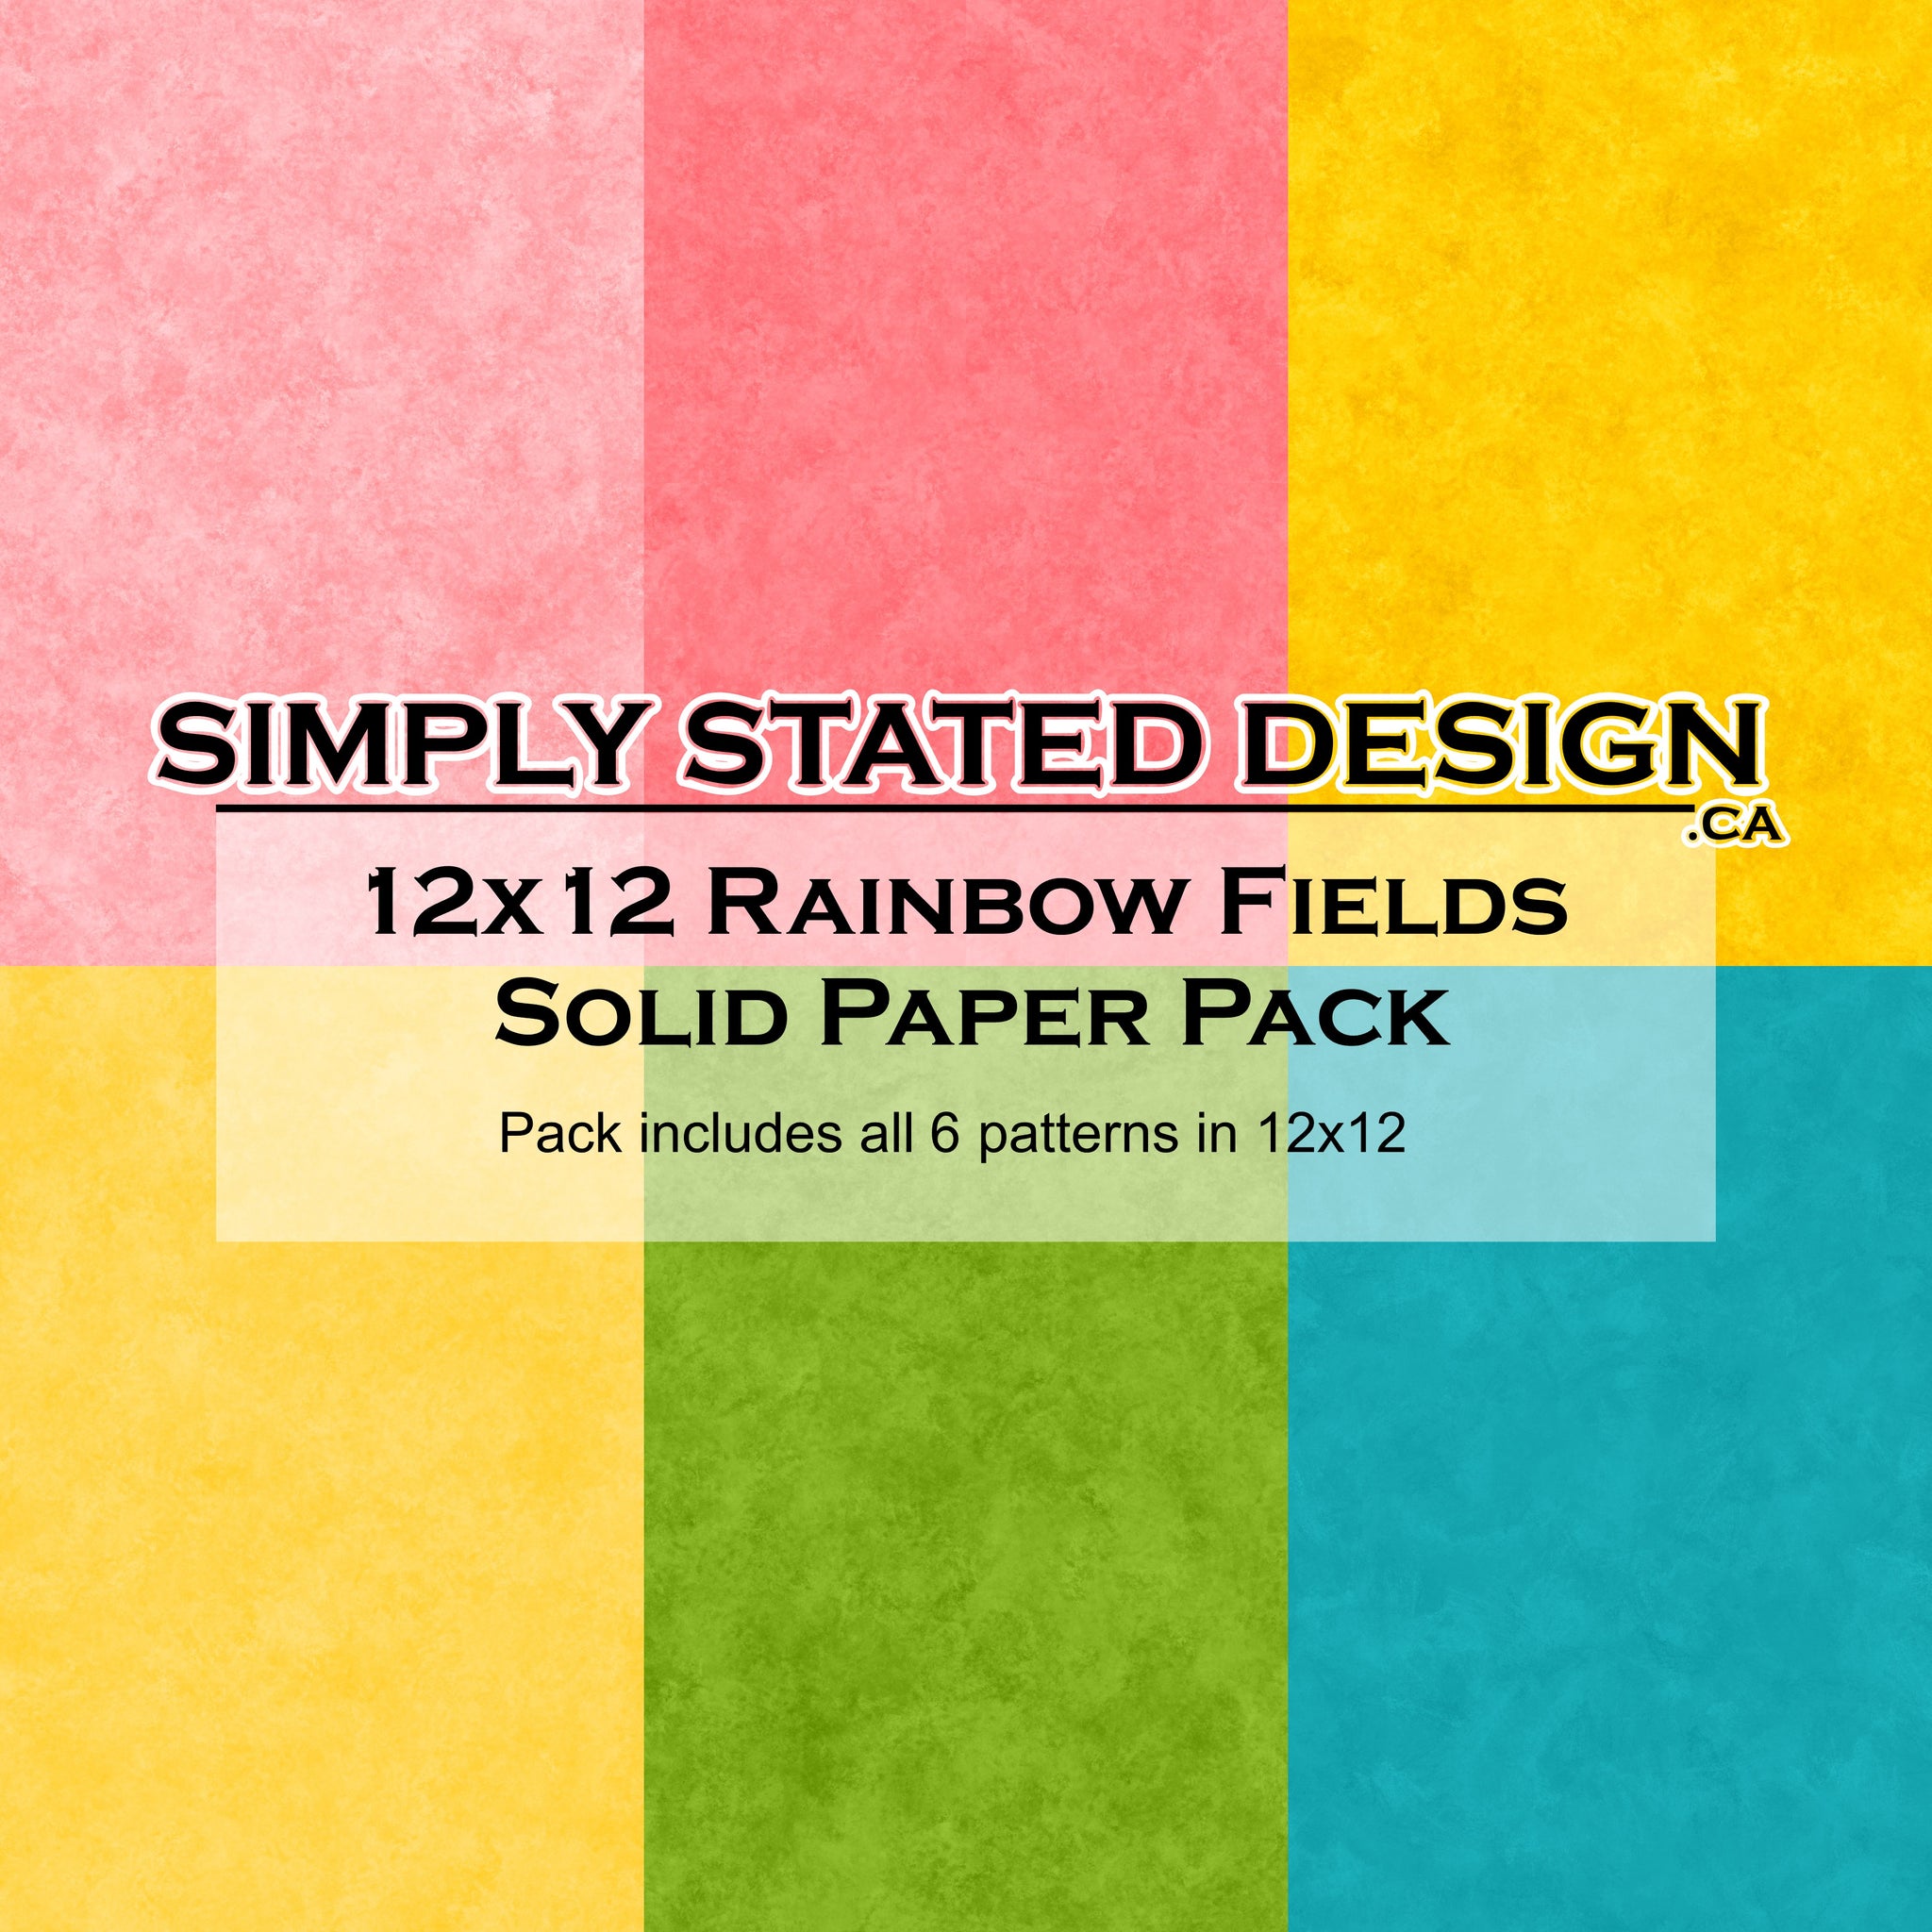 May "Rainbow Fields" 12x12 Solid Paper Pack